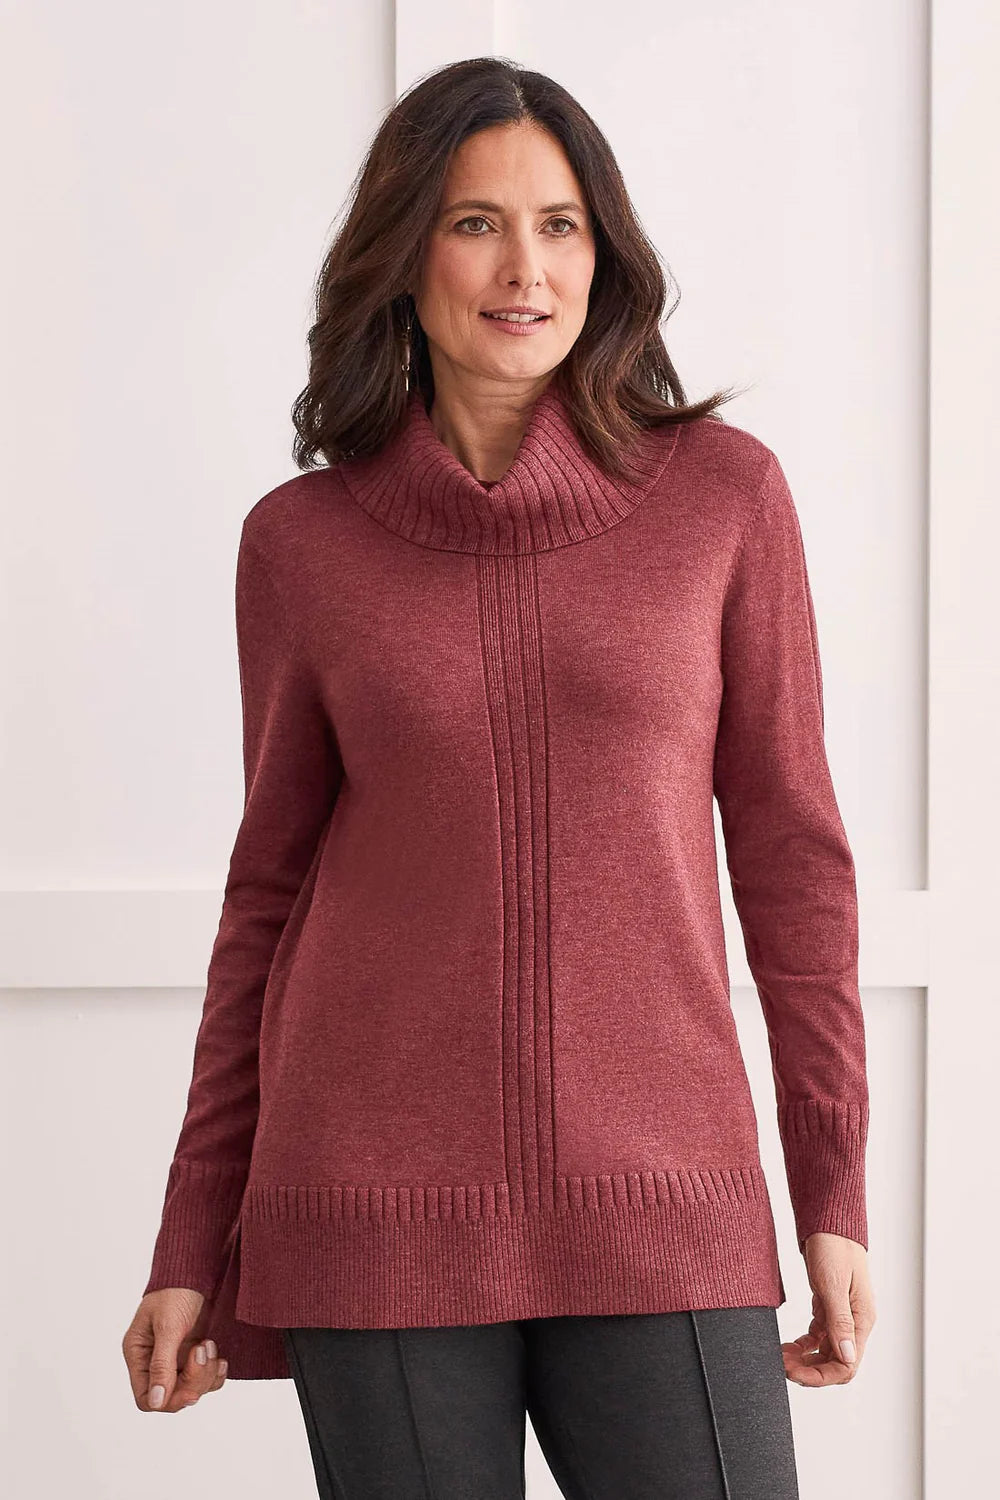 This sweater will instantly win you over with its chic cowl neckline and blended yarn fabric that cloaks you in comfort.